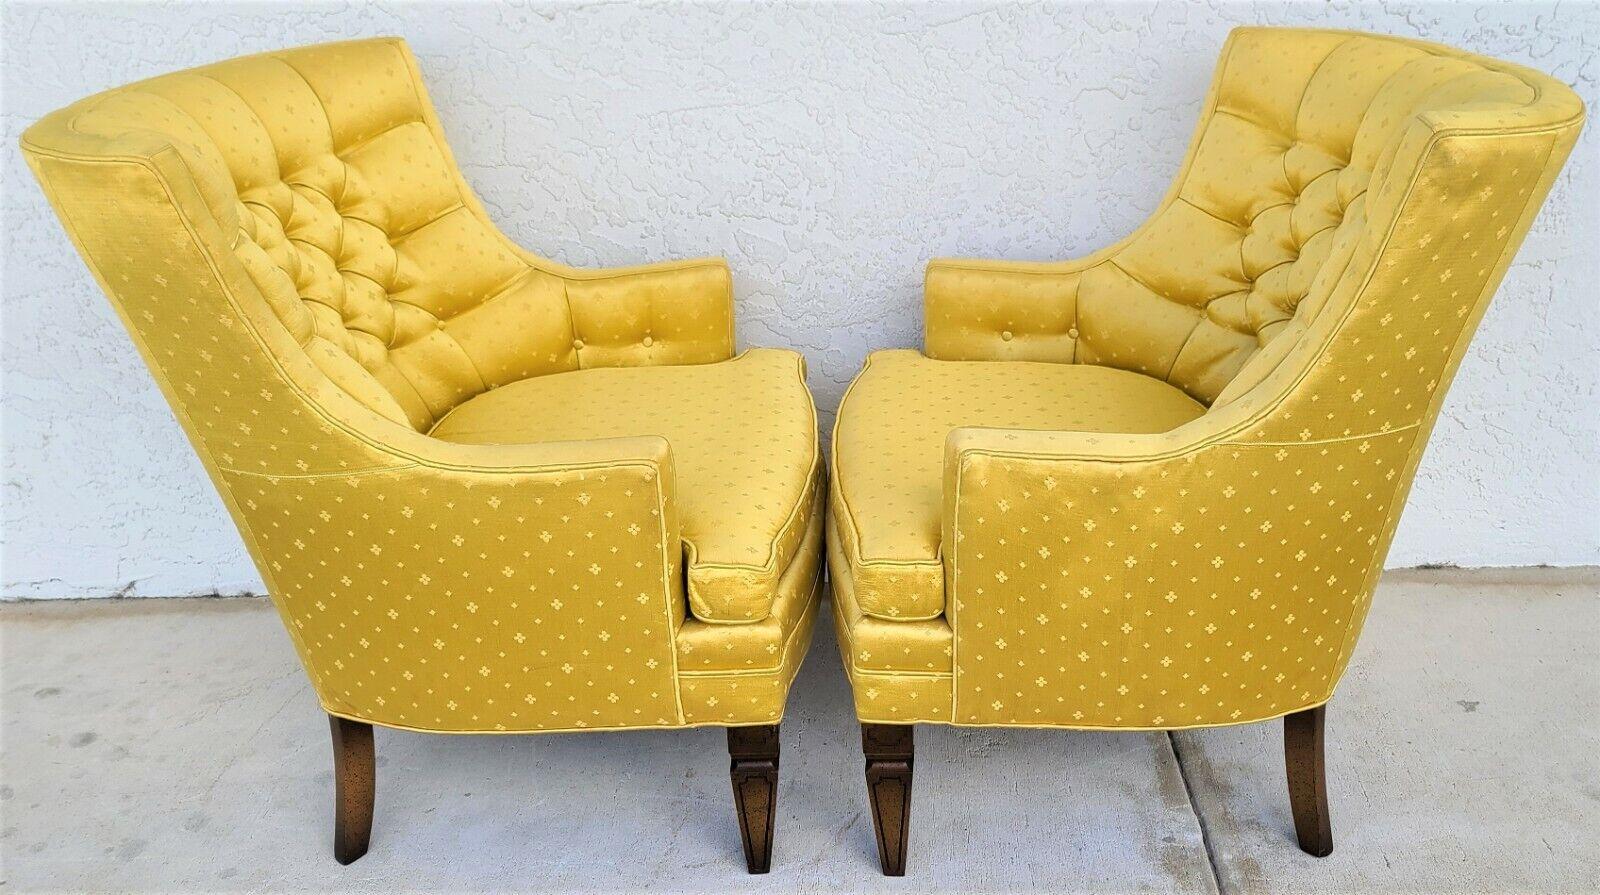 Mid-20th Century Hollywood Regency Tufted Club Lounge Chairs by SILVER CRAFT - A Pair For Sale